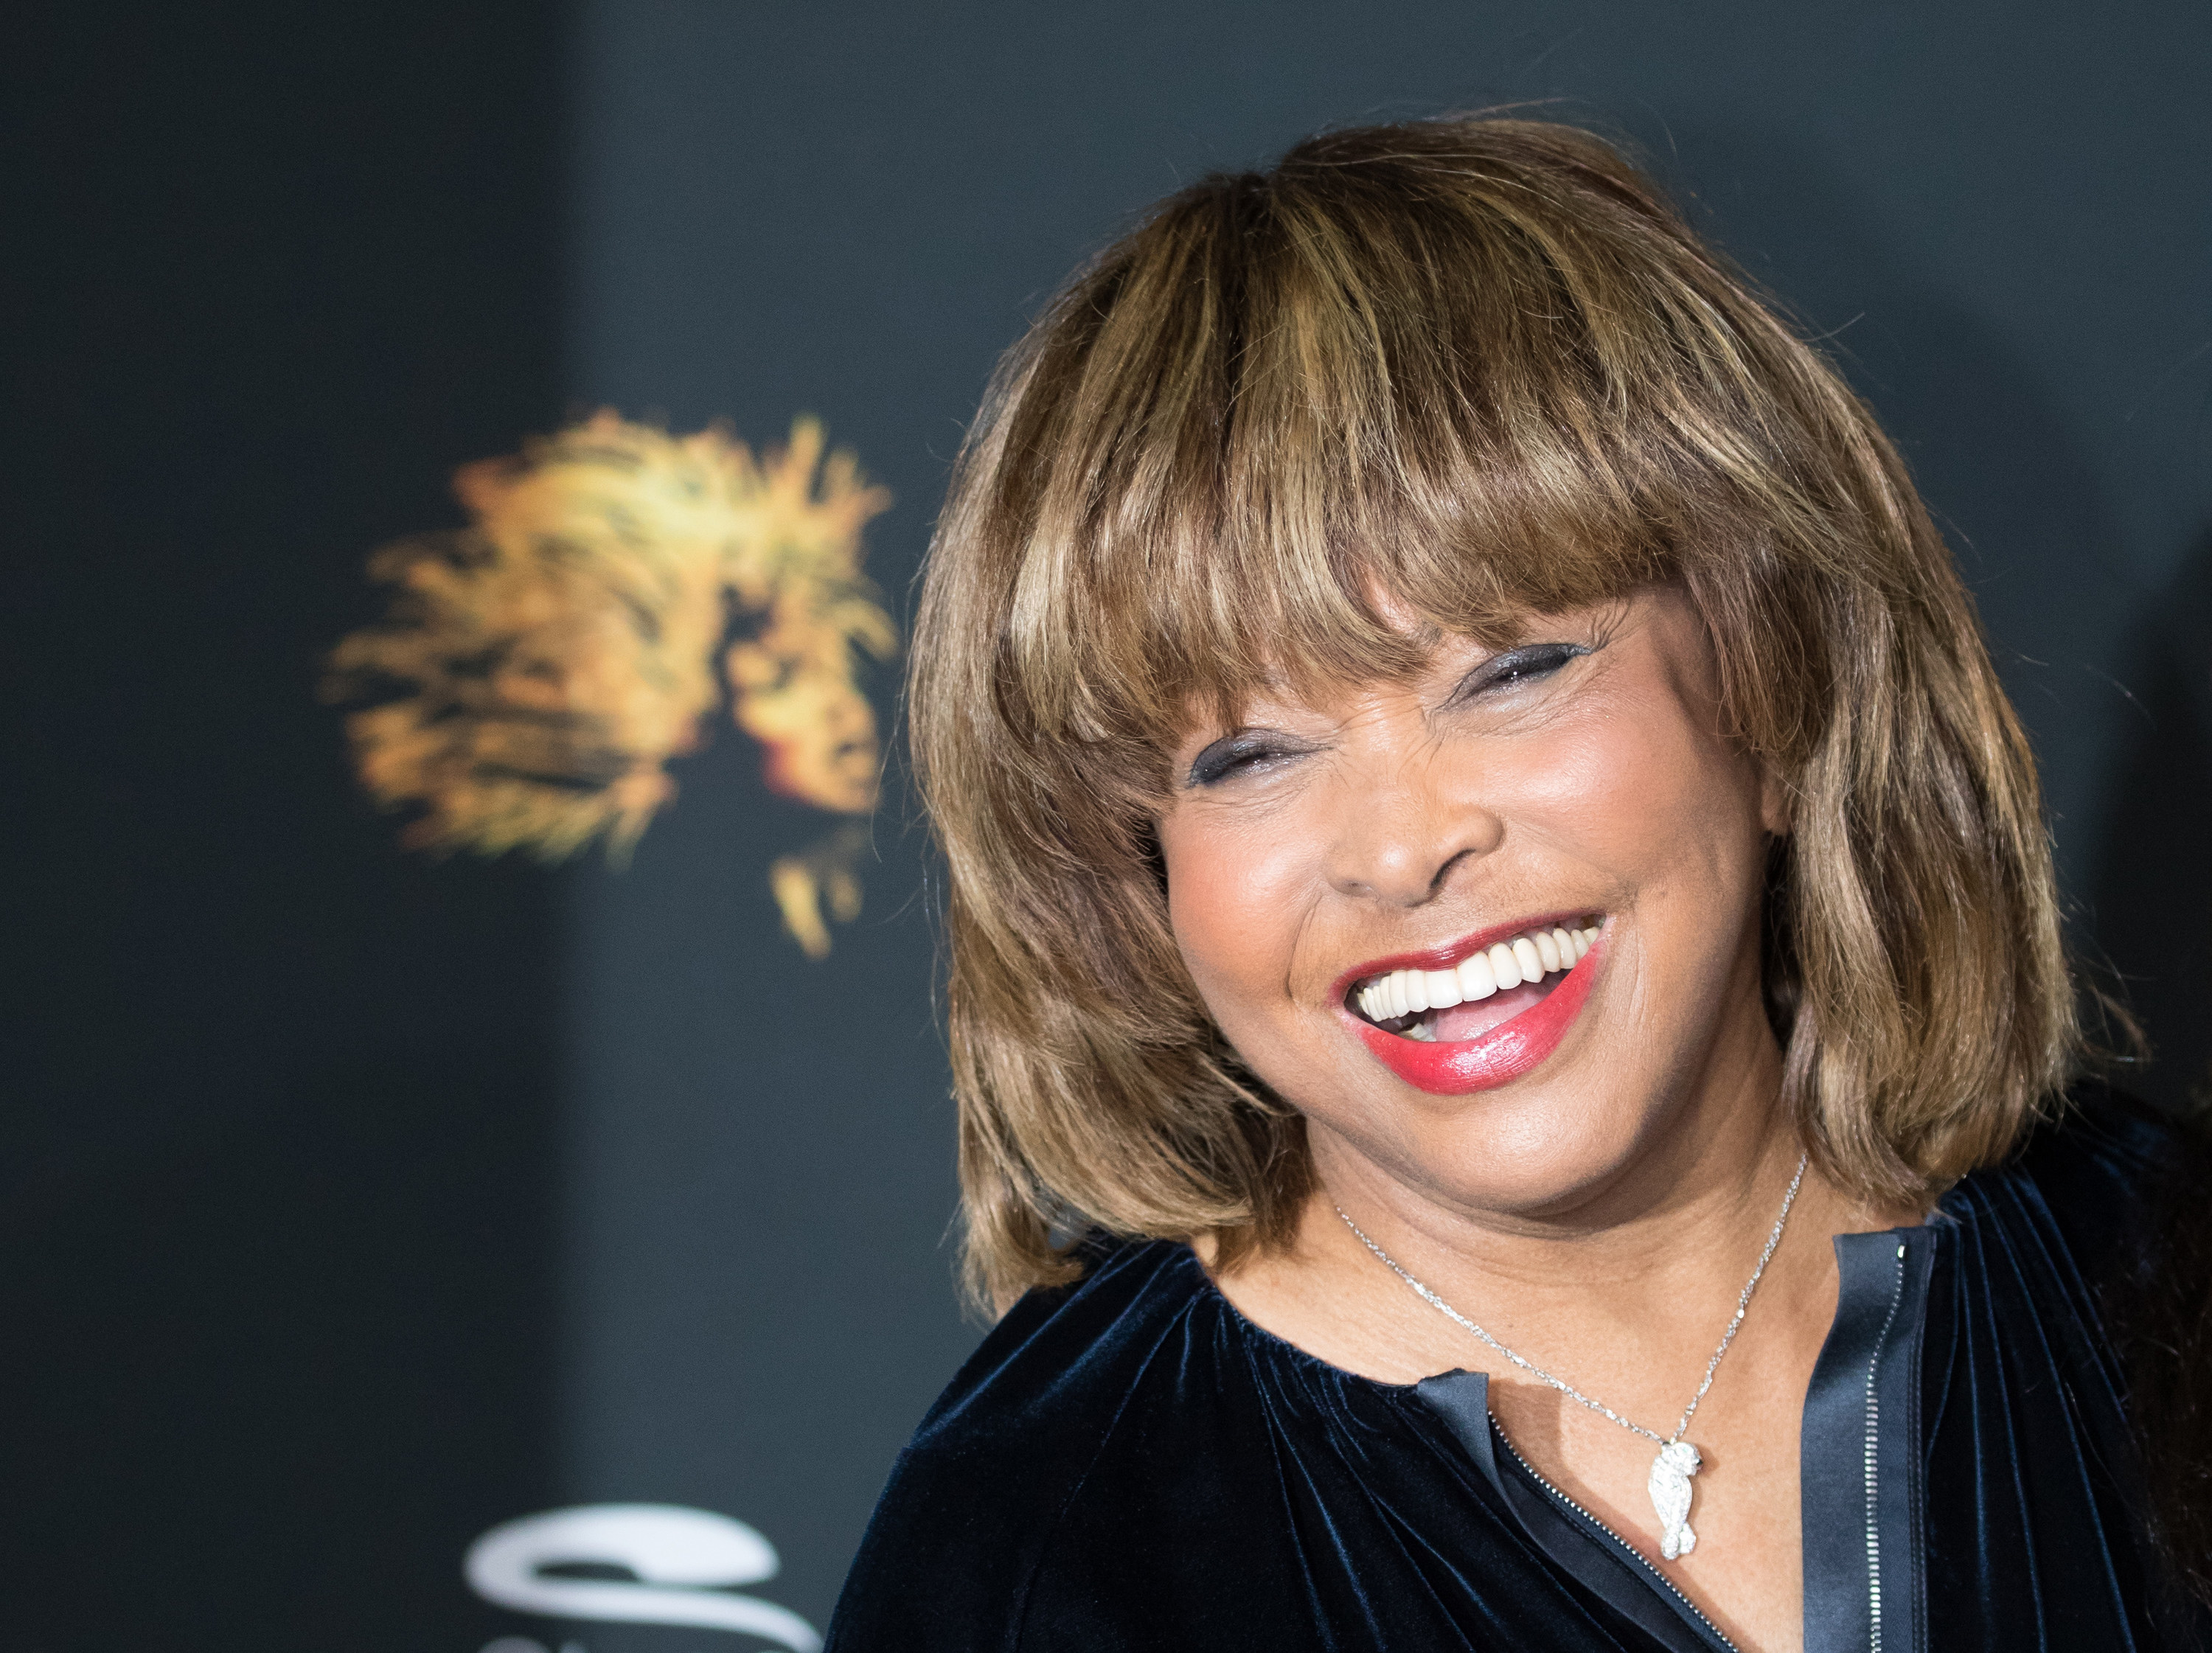 Tina Turner smiles while attending a photo shoot for &quot;Tina - The Tina Turner Musical&quot; in 2018